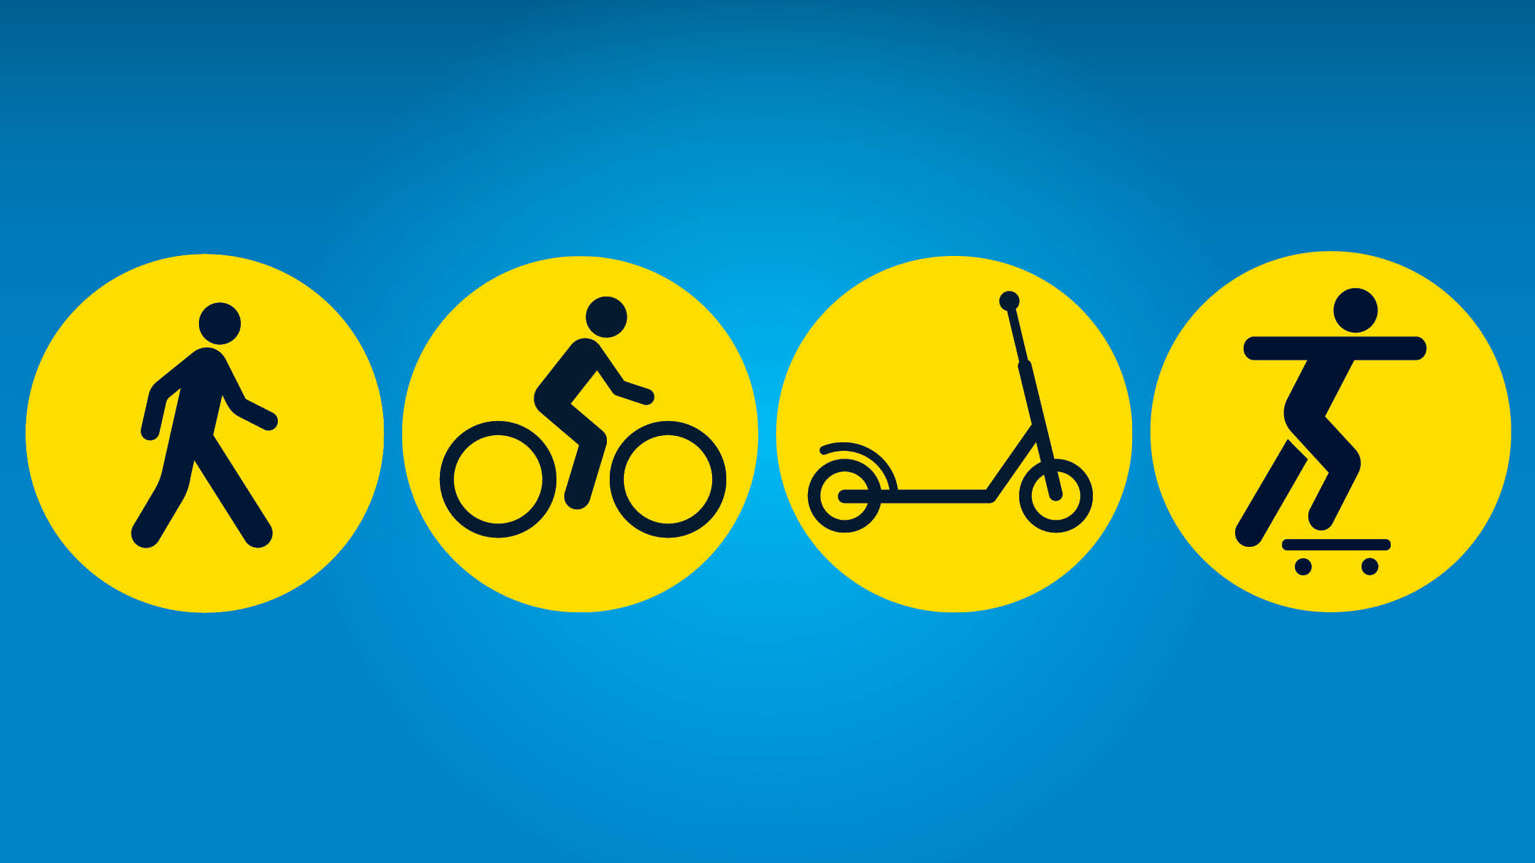 Blue background with four yellow circles. From left to right, the circles show a walking icon, cycling icon, scooter icon and skateboarding icon.